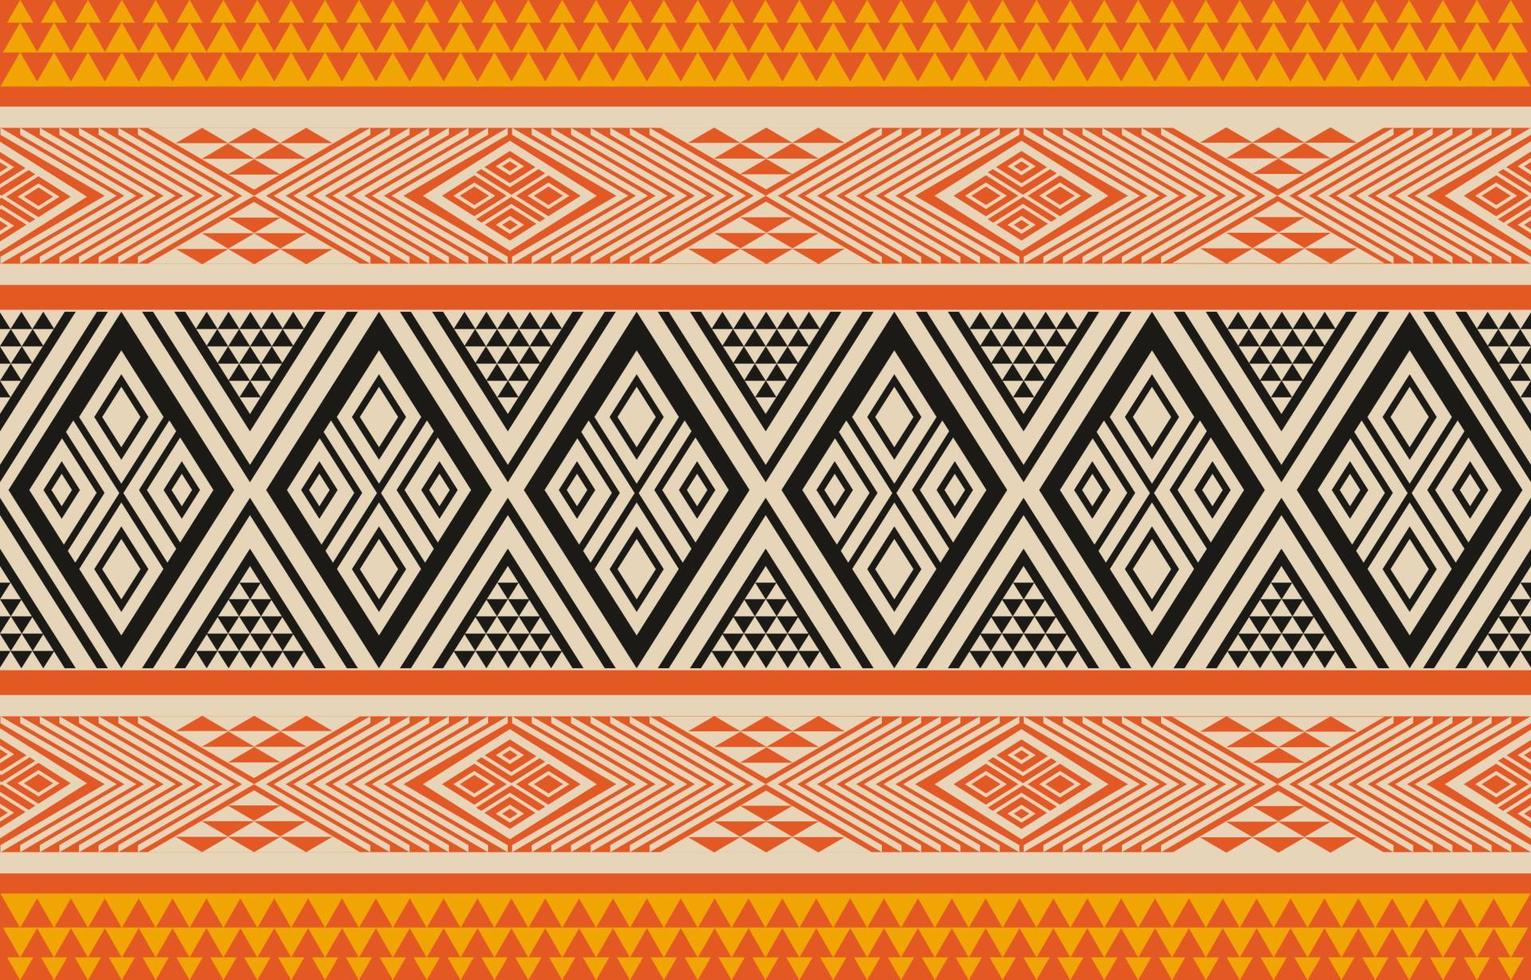 https://static.vecteezy.com/system/resources/previews/012/732/496/non_2x/triangle-geometric-pattern-colorful-tribal-ethnic-texture-style-design-for-printing-on-products-background-scarf-clothing-wrapping-fabric-illustration-vector.jpg